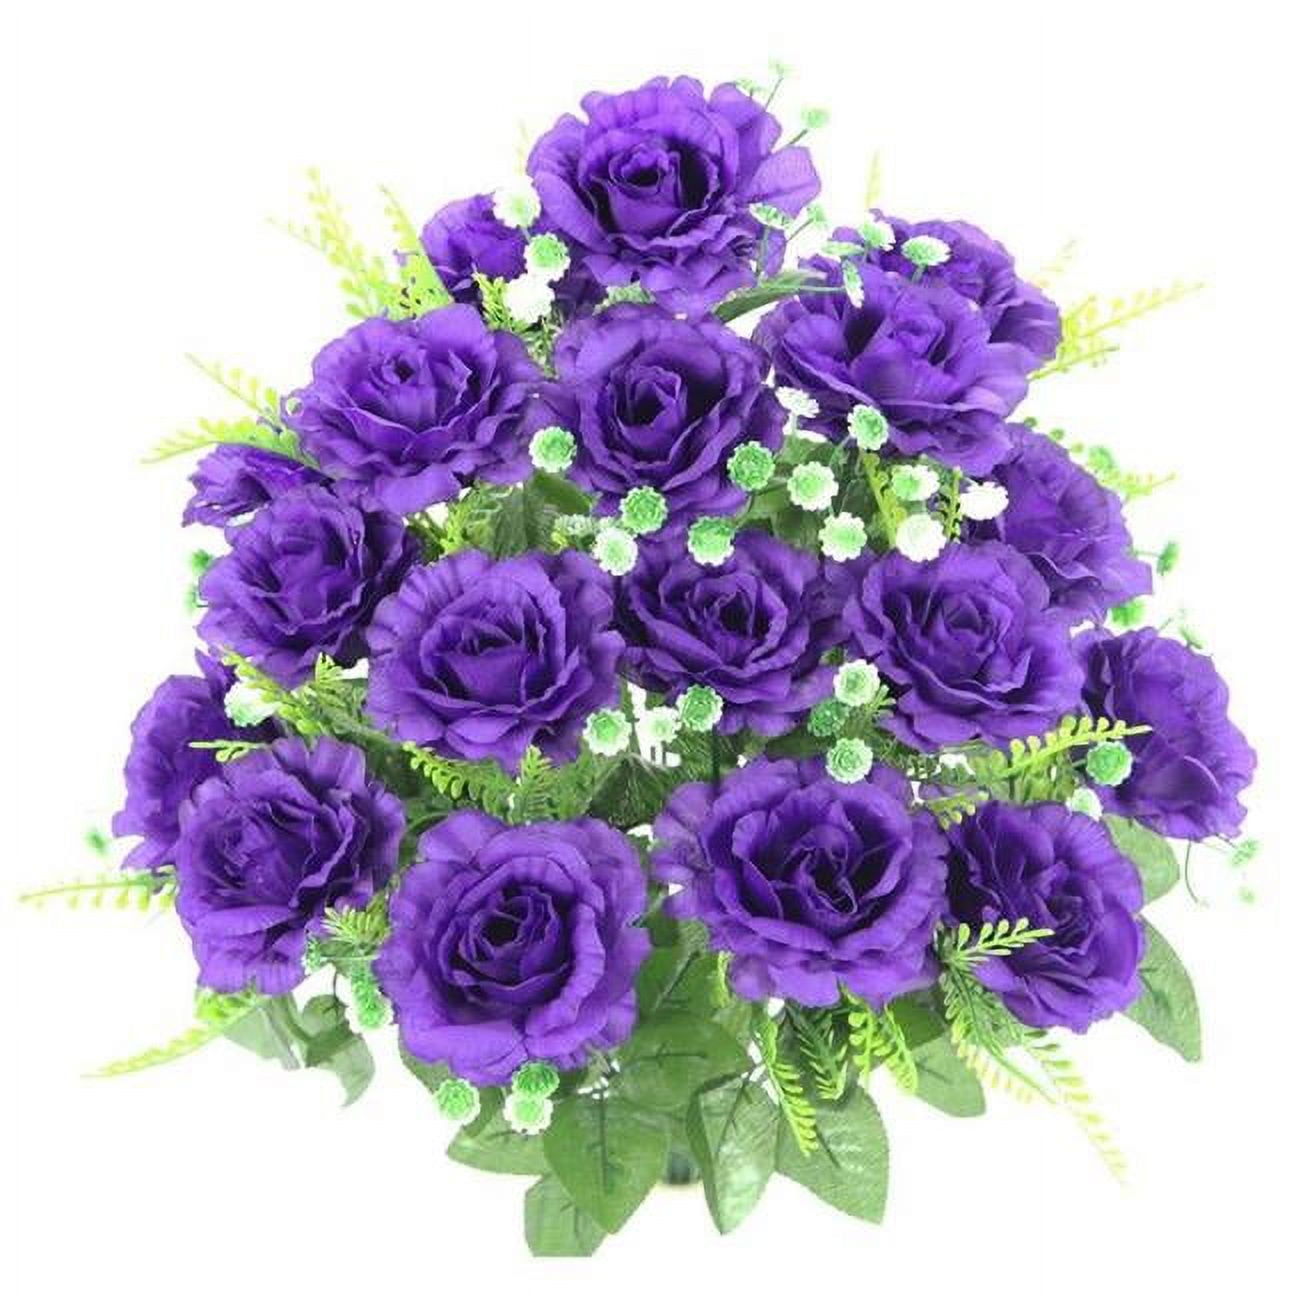 Picture of Admired by Nature ABN1B002-PRPL 3 x 1.5 in. 18 Stems Artificial Full Blooming Rose with Greenery Flower Bush - Pink & Purple